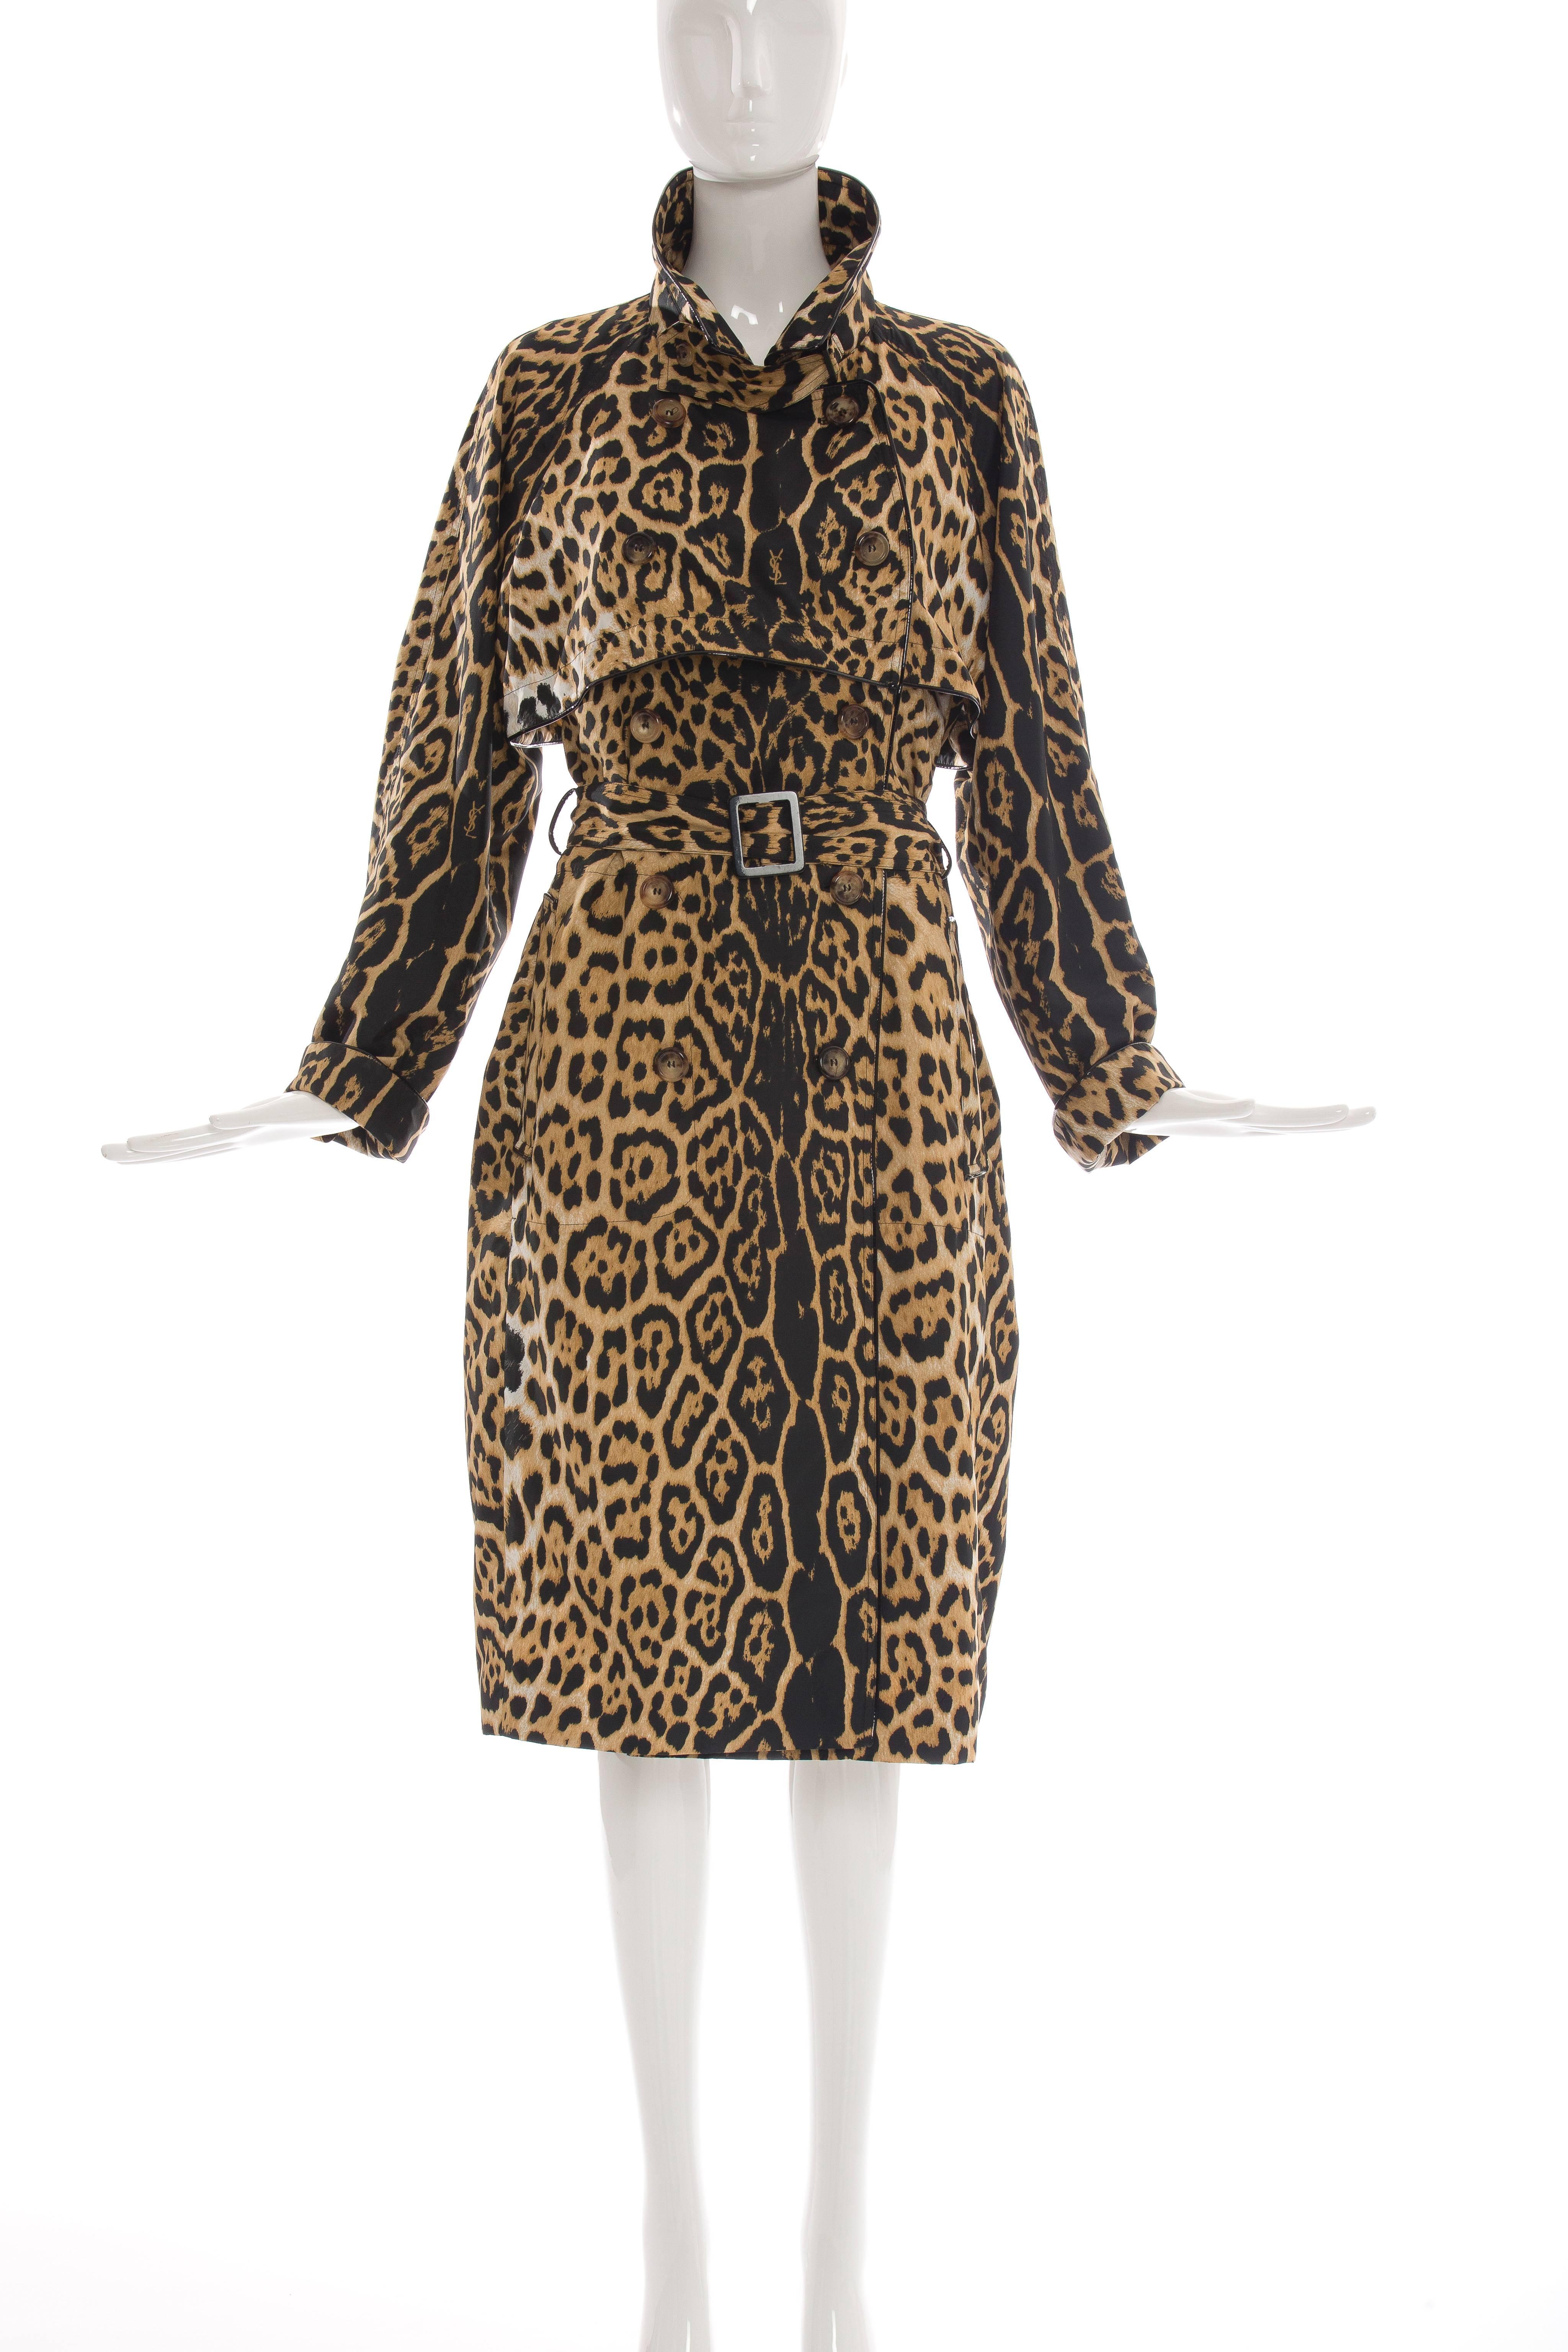 Yves Saint Laurent by Stefano Pilati, circa 2005, double-breasted trench coat with storm flaps, leopard print throughout dual slit pockets at hips, matching belt at waist and button closures at front.

FR.42
US. 10

Bust 44”, Waist 44”,